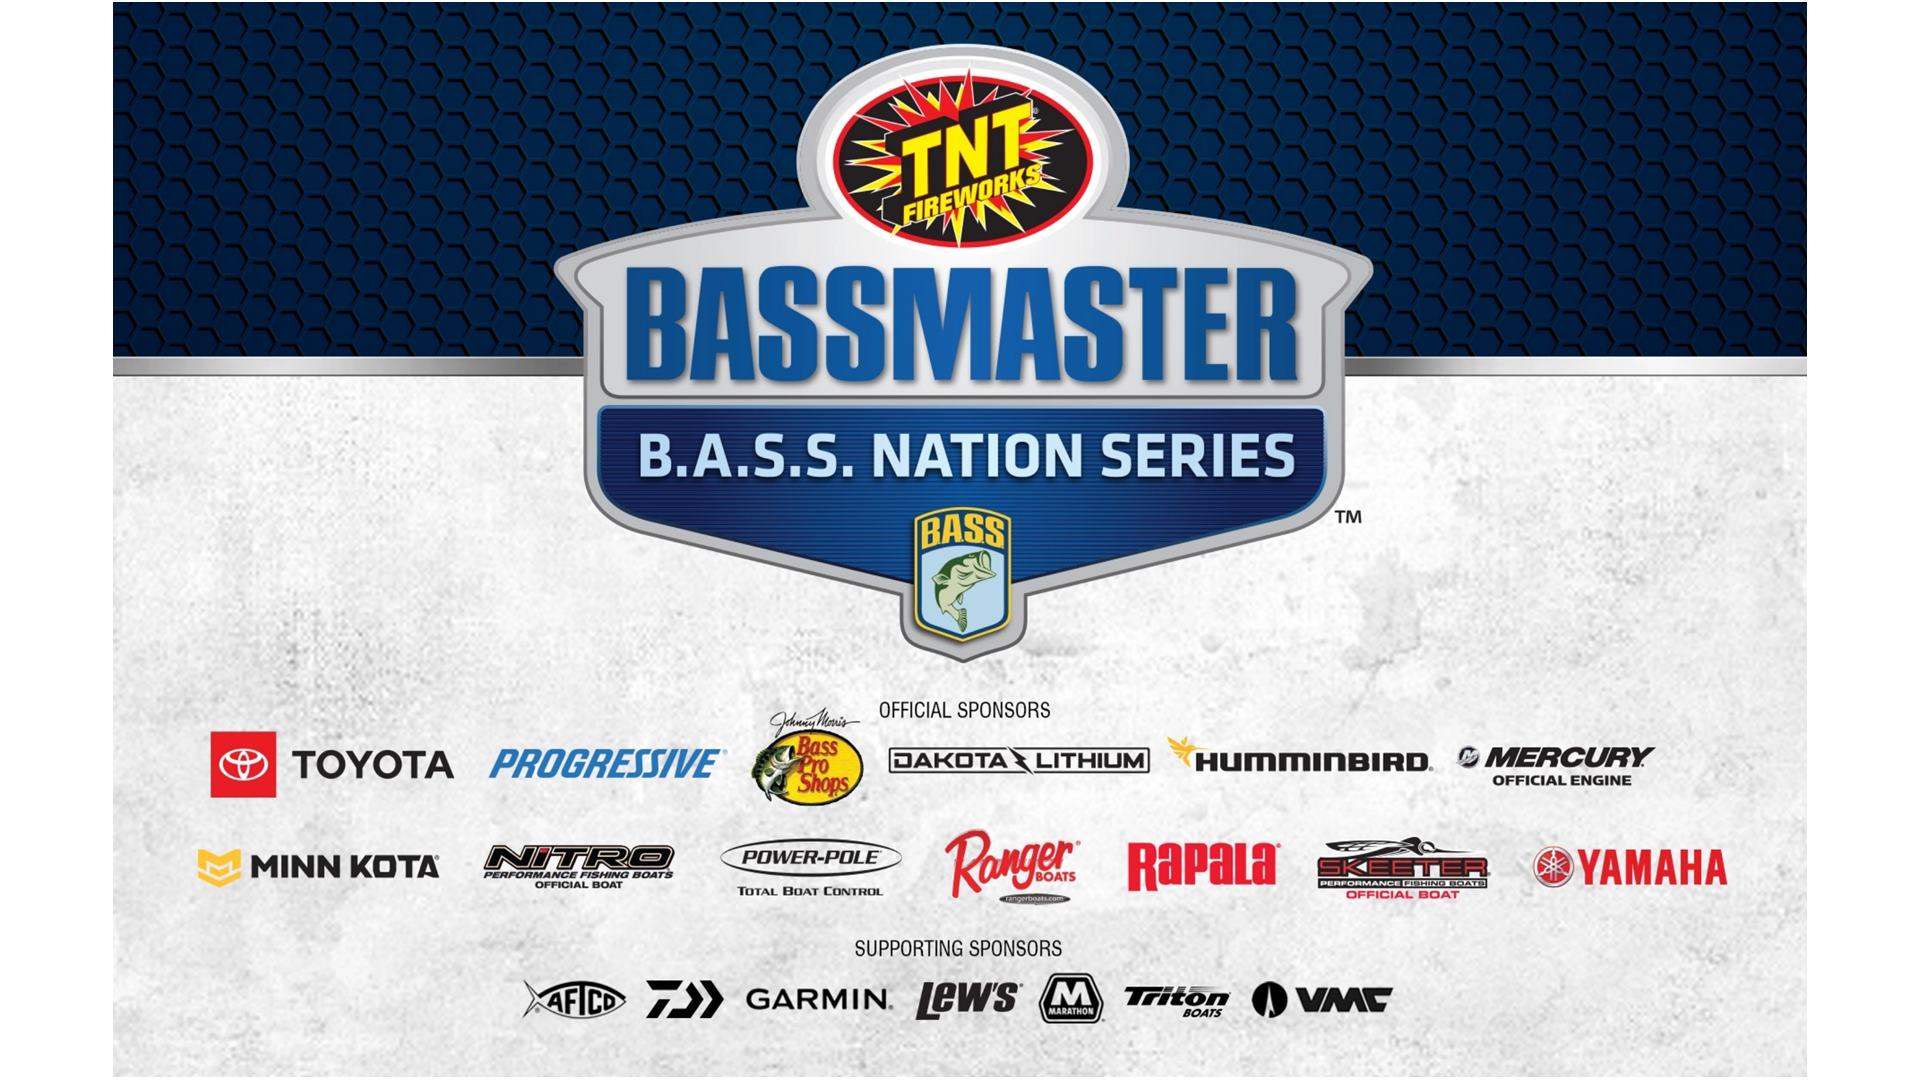 2022 B.A.S.S. Nation Series Sponsors